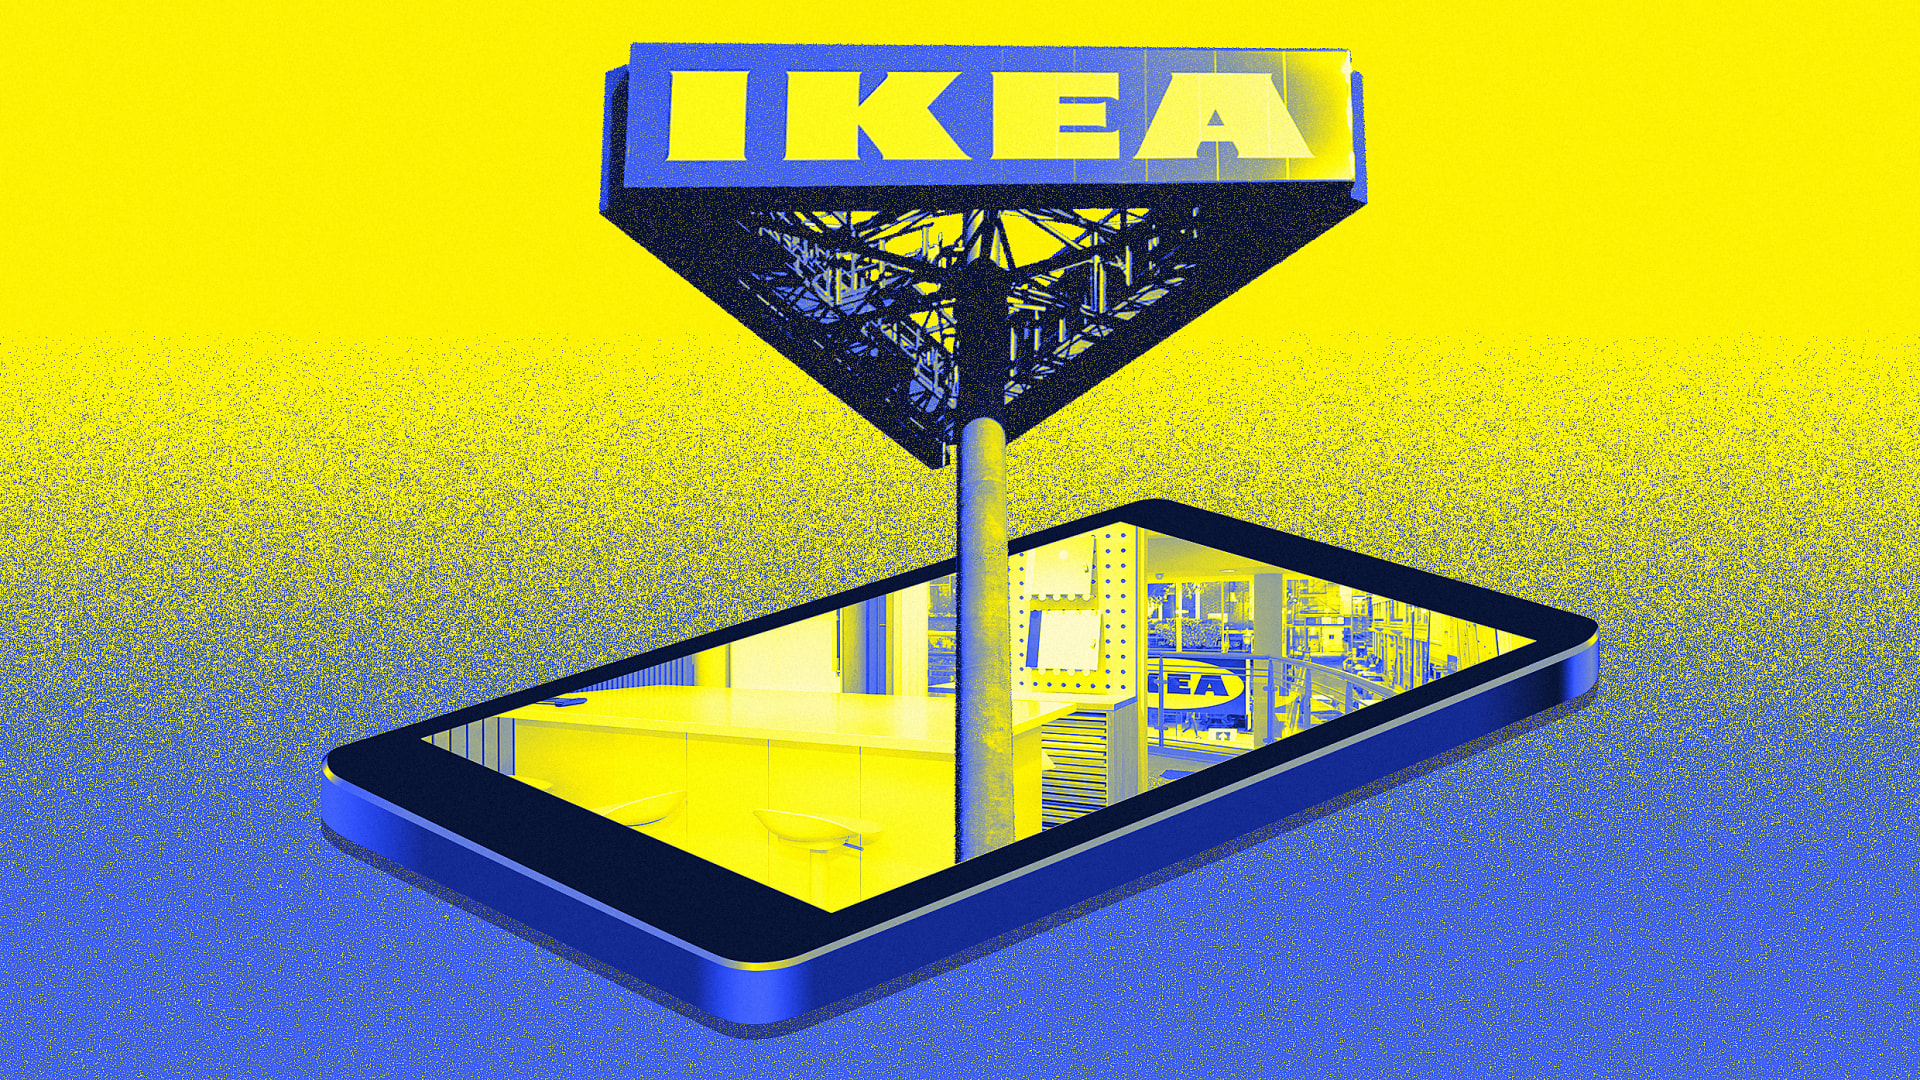 Ikea is launching a new, superpowered shopping app this year